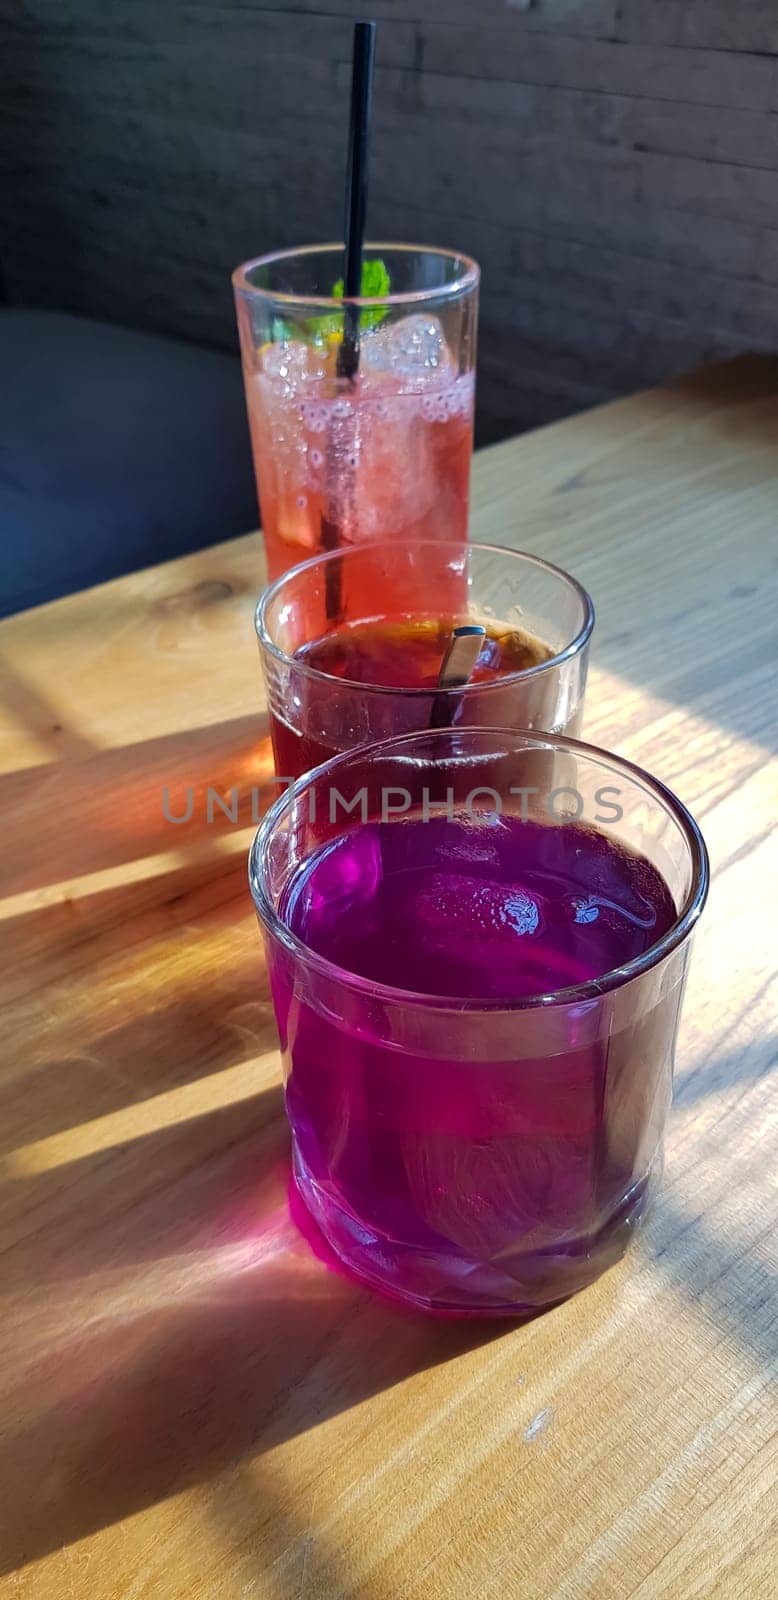 Transparent Glasses with sweet drinks inside with colorful drink, with shadow and table background with ice cubes by antoksena